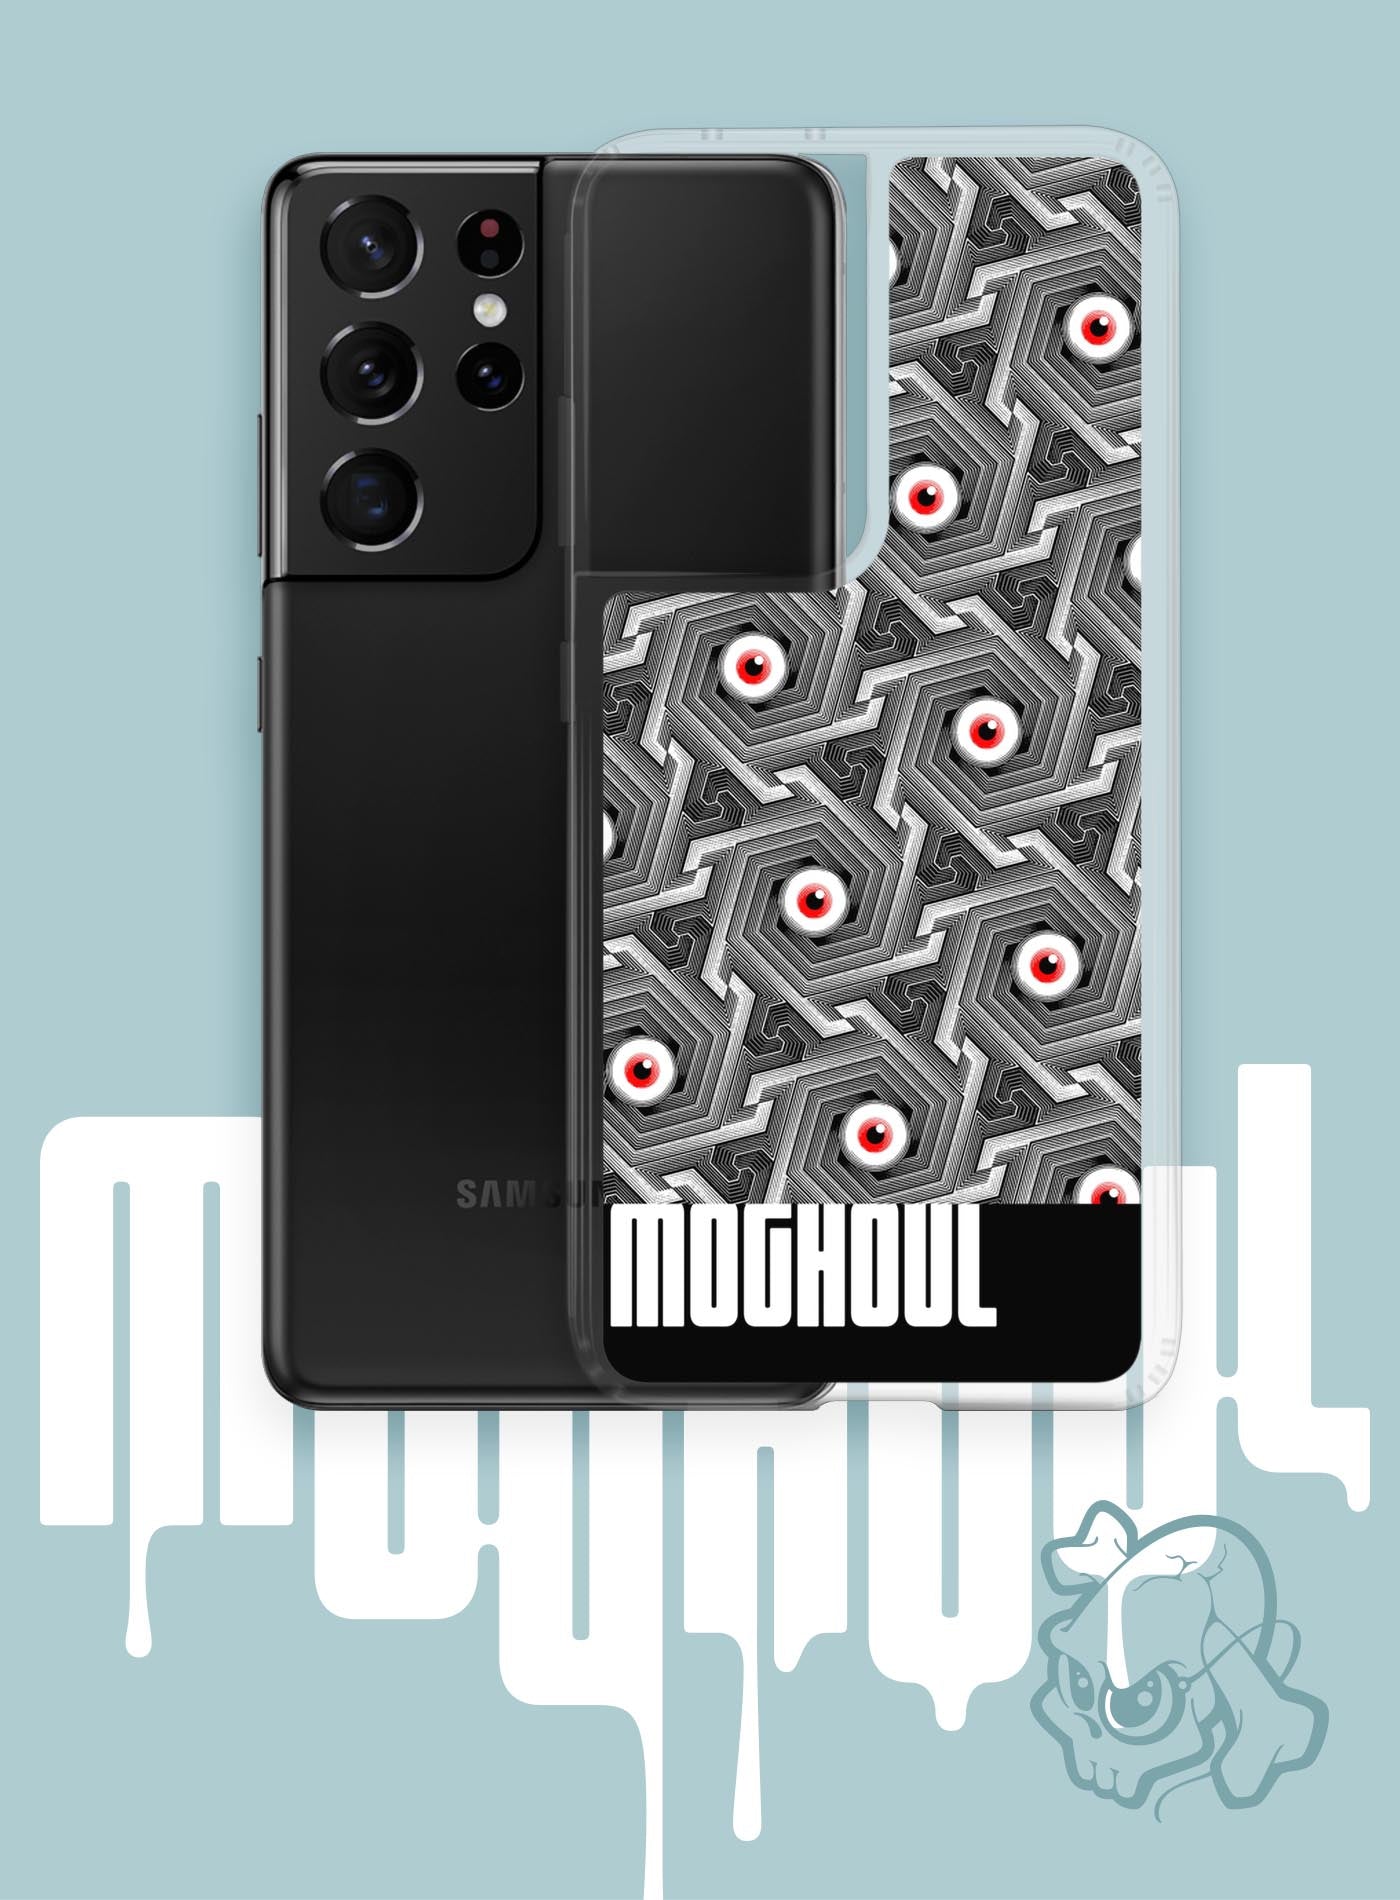 Samsung phonecase featuring a pattern of red zombie eyes inspired by islamic ornamental art by Topo.